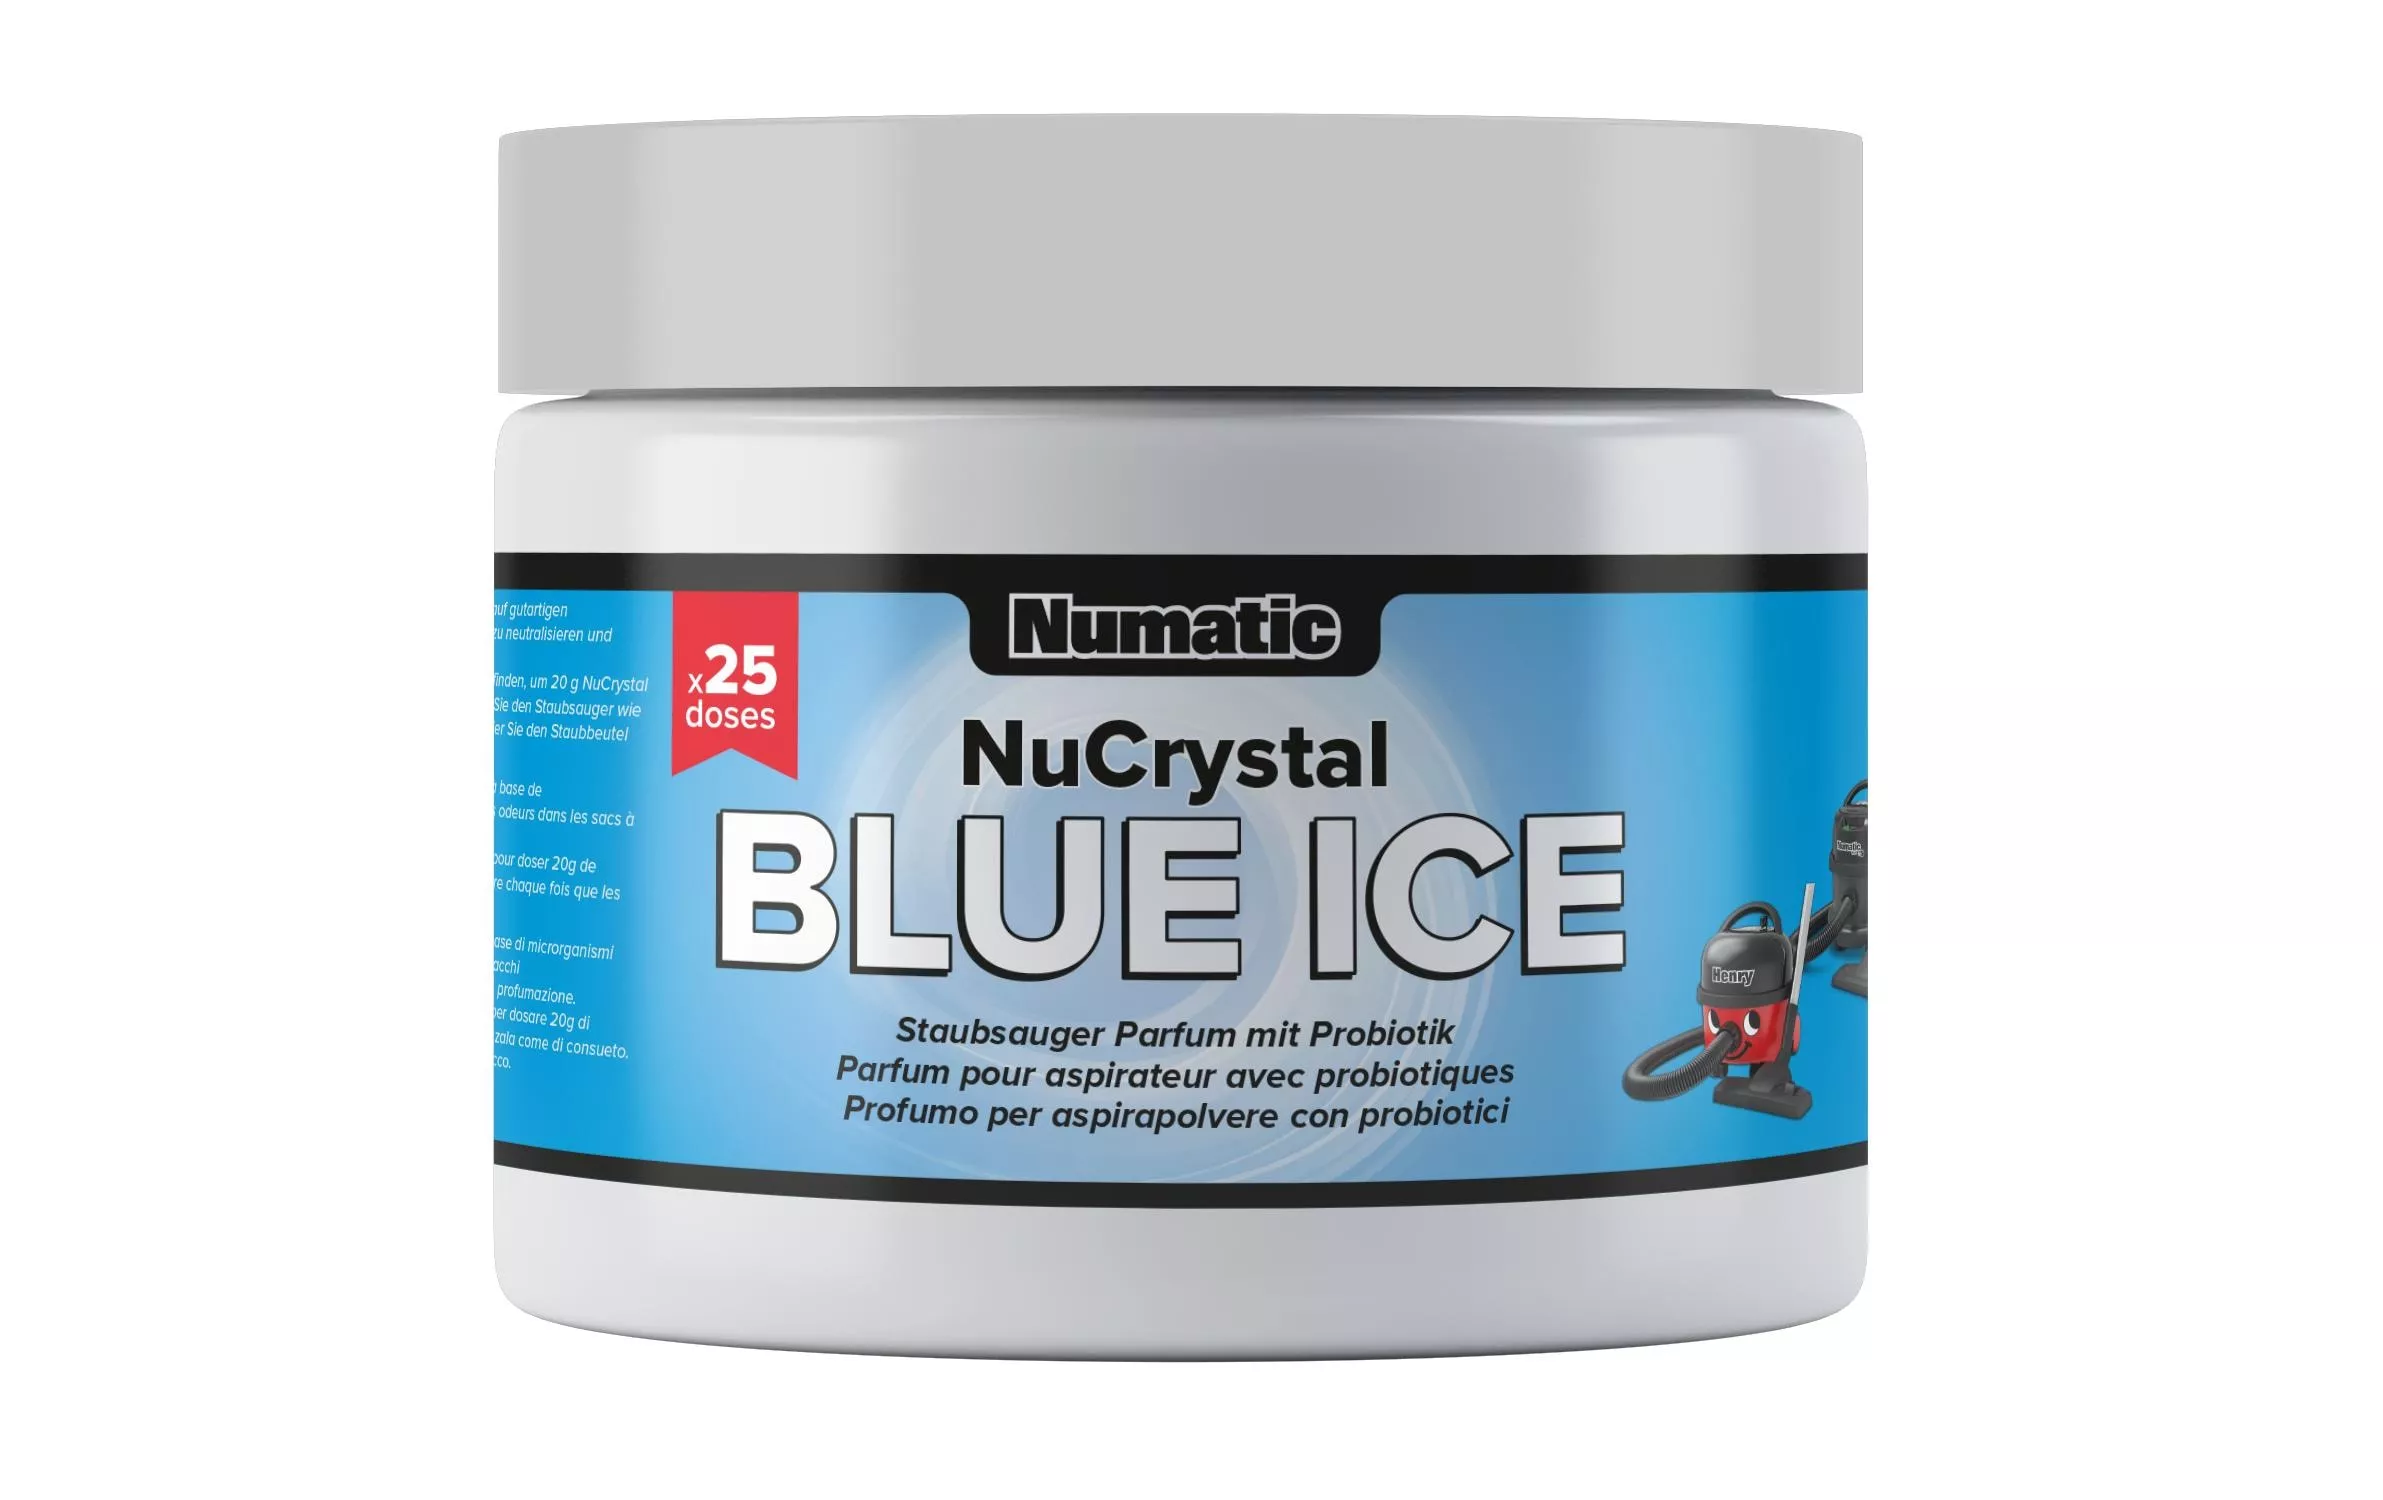 Staubsauger Deo NuCrystal Blue Ice